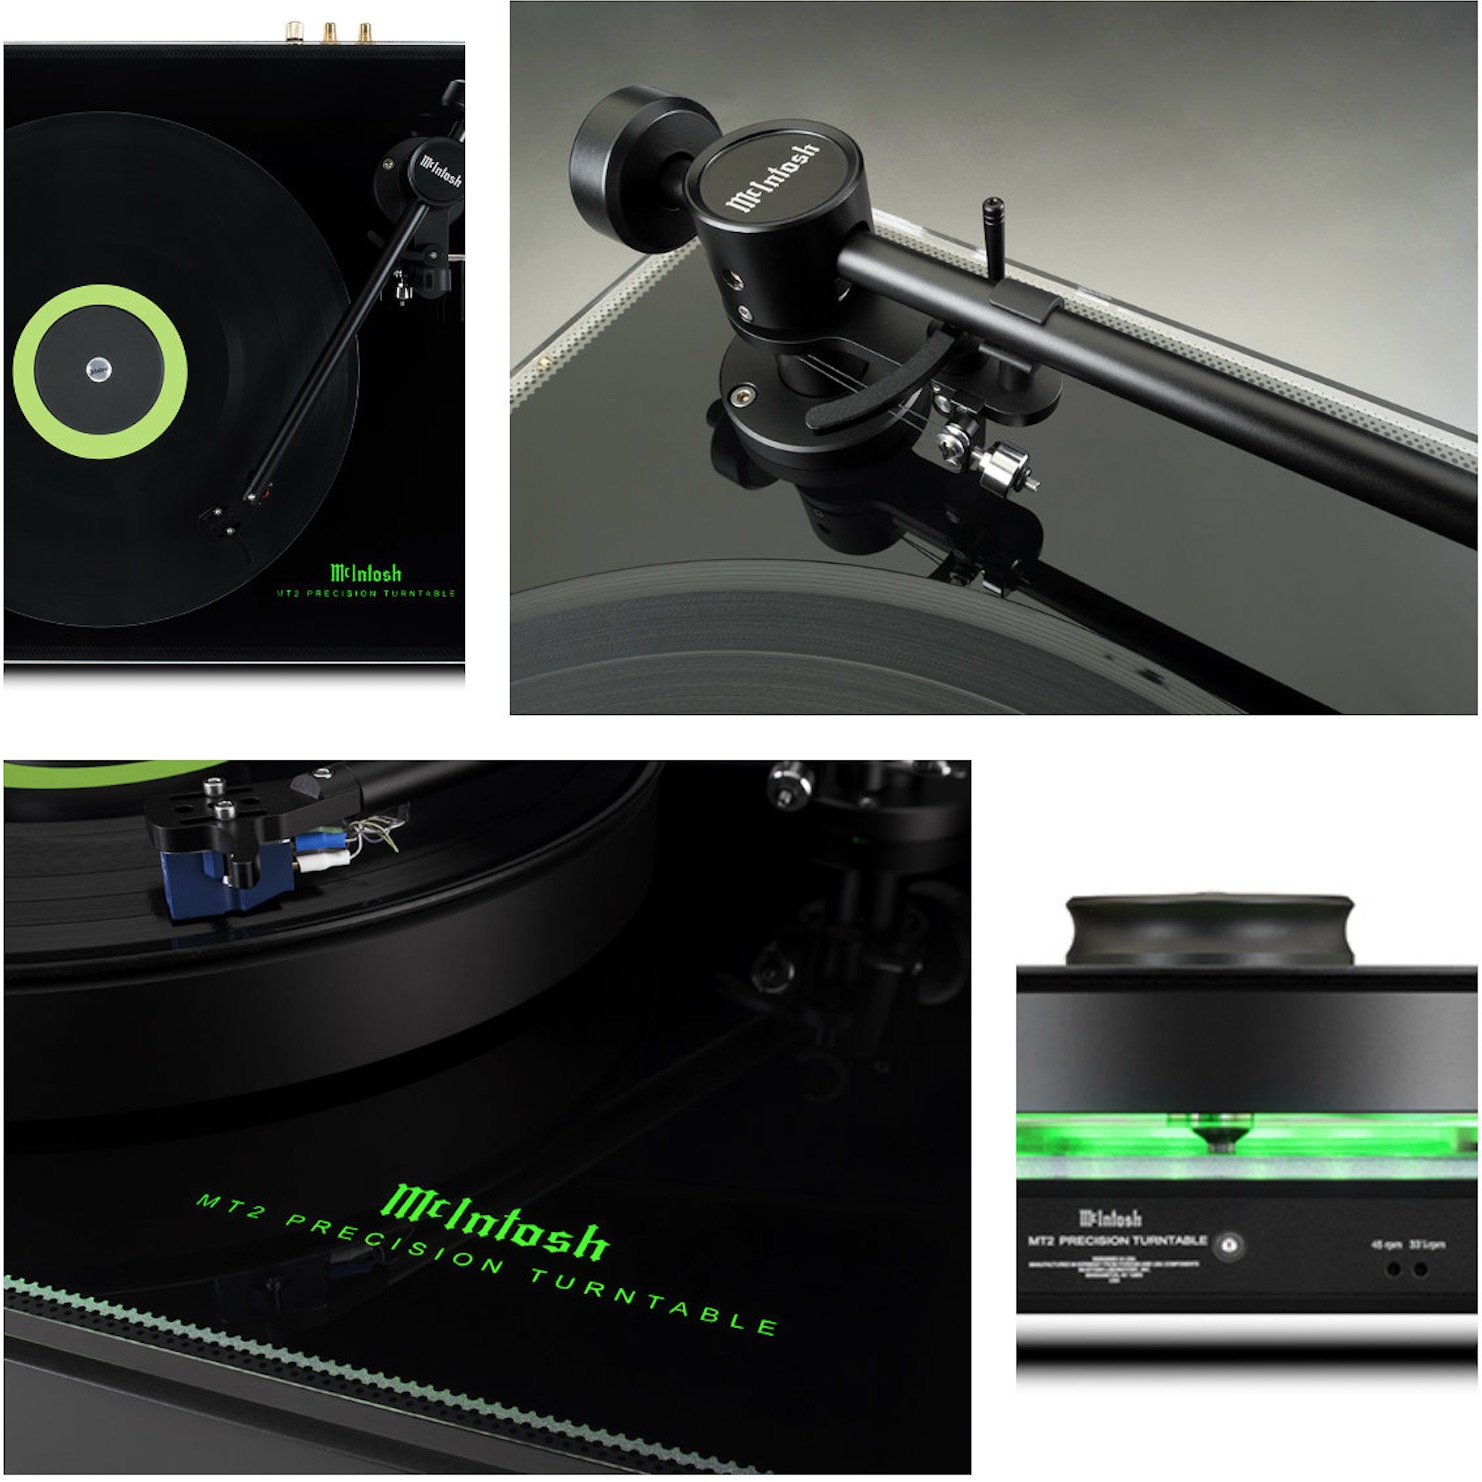 MT2 Turntable From McIntosh: The Entry Level